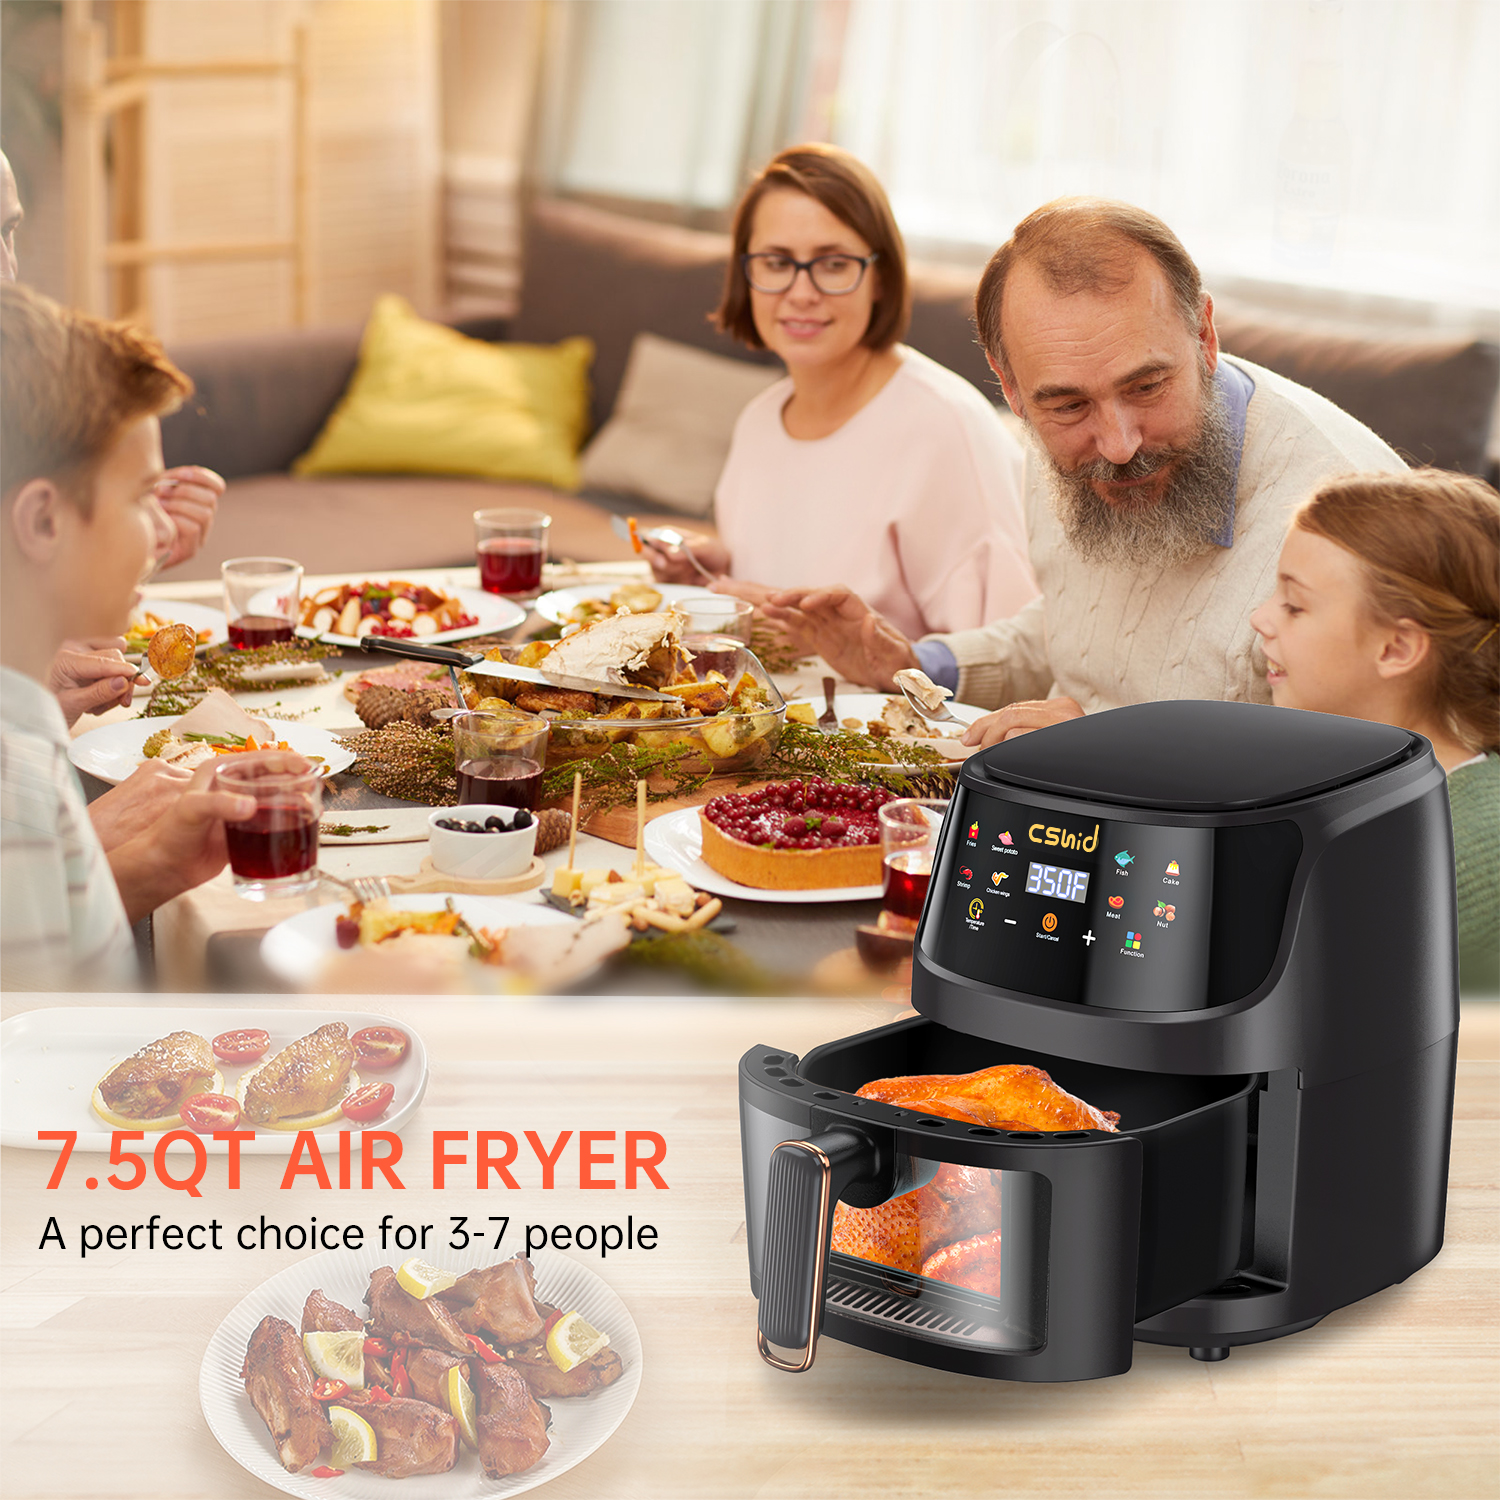 Air Fryer 5L Large Capacity Touch Screen Smart Fryers Household Multi-function Window Visible Air fryer that Crisps, Roasts, Reheats, & Dehydrates - image 5 of 7